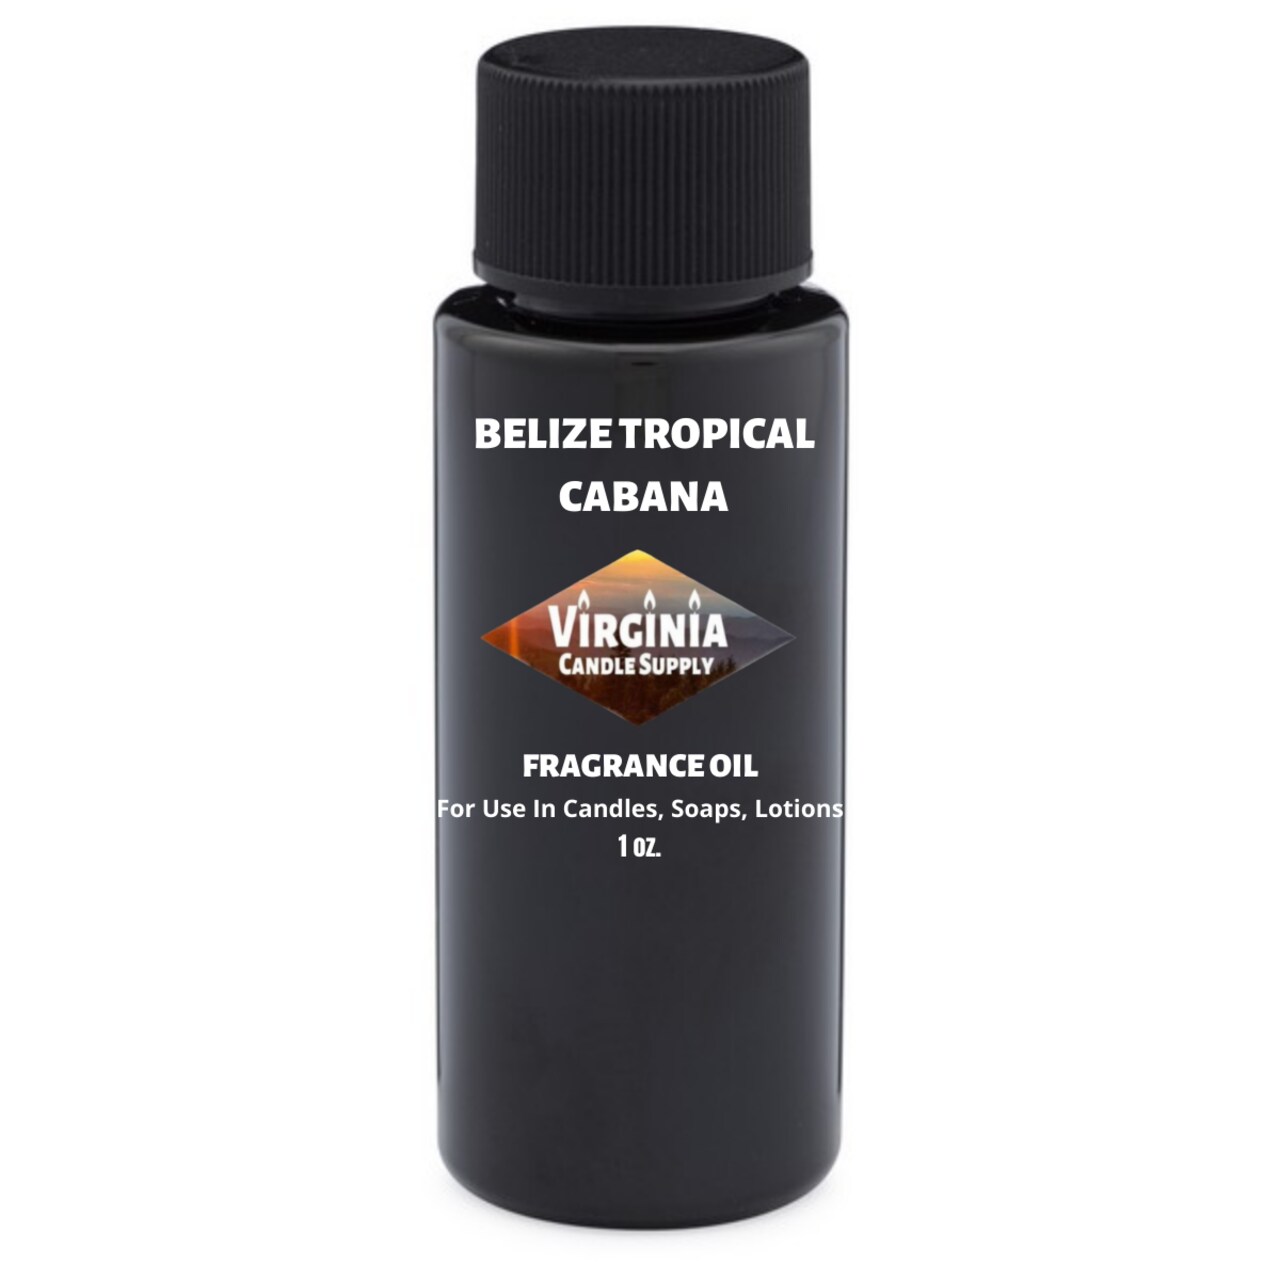 Belize Tropical Cabana Fragrance Oil (Our Version of the Brand Name) (1 oz Bottle) for Candle Making, Soap Making, Tart Making, Room Sprays, Lotions, Car Fresheners, Slime, Bath Bombs, Warmers&#x2026;